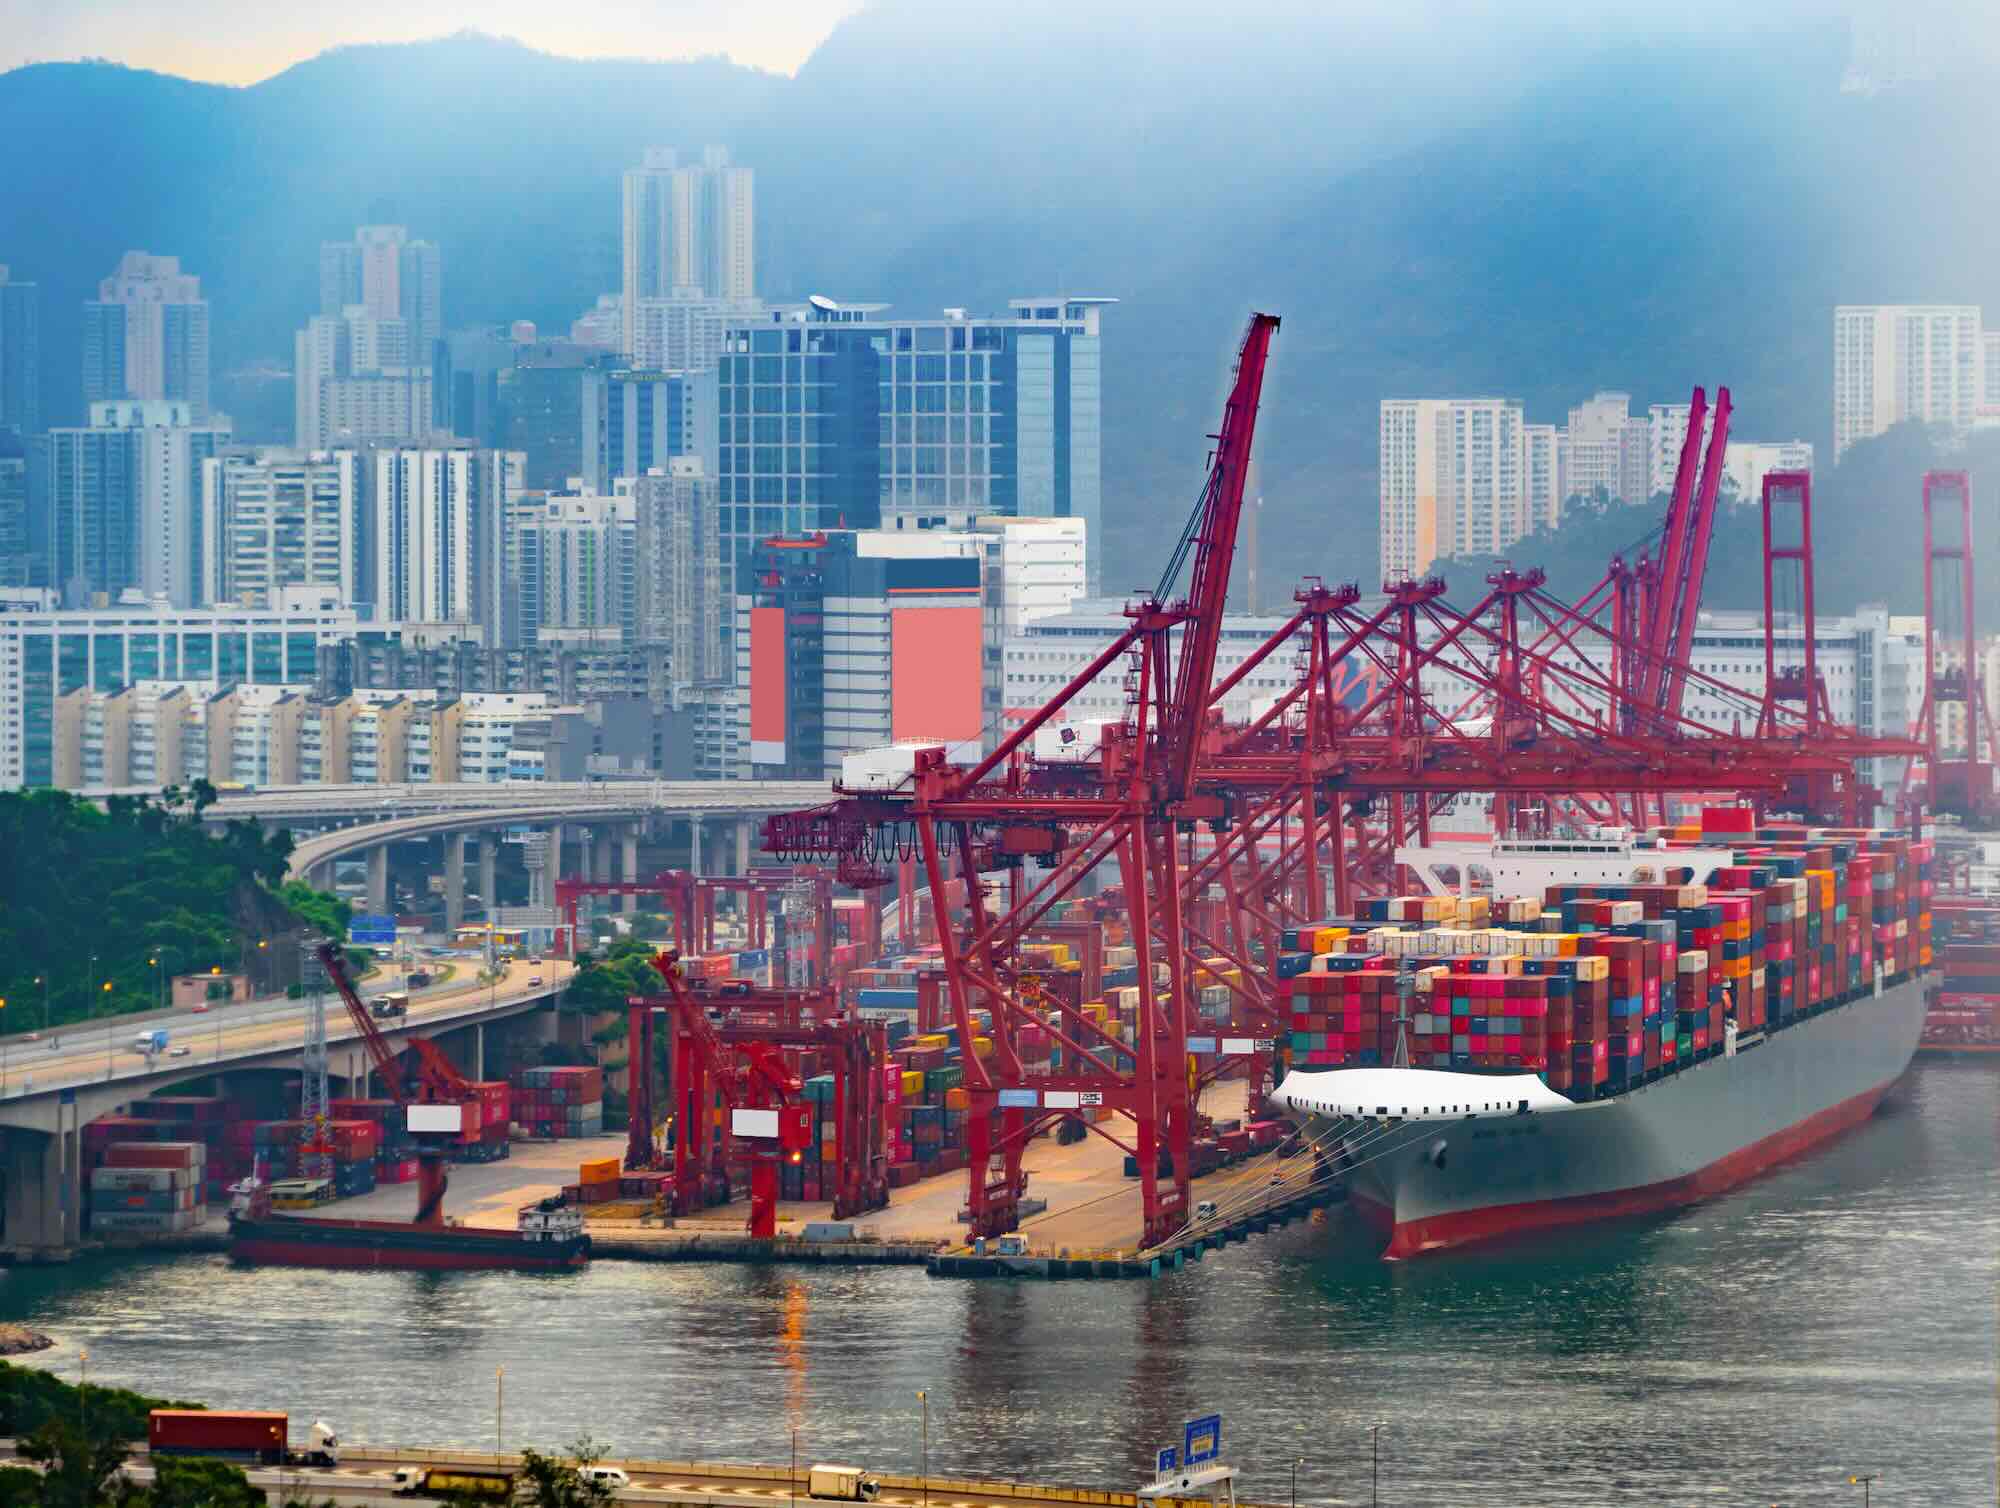 Aerial view of a cargo ship about to dock in a shipyard or dock area. There are large, red cranes in the middle of the picture. In the background there is a city. The photo illustrates the web of possible connections and vulnerabilities ships face with respect to digitalization. Maritime cyber security relates to both ship side and land side operations.